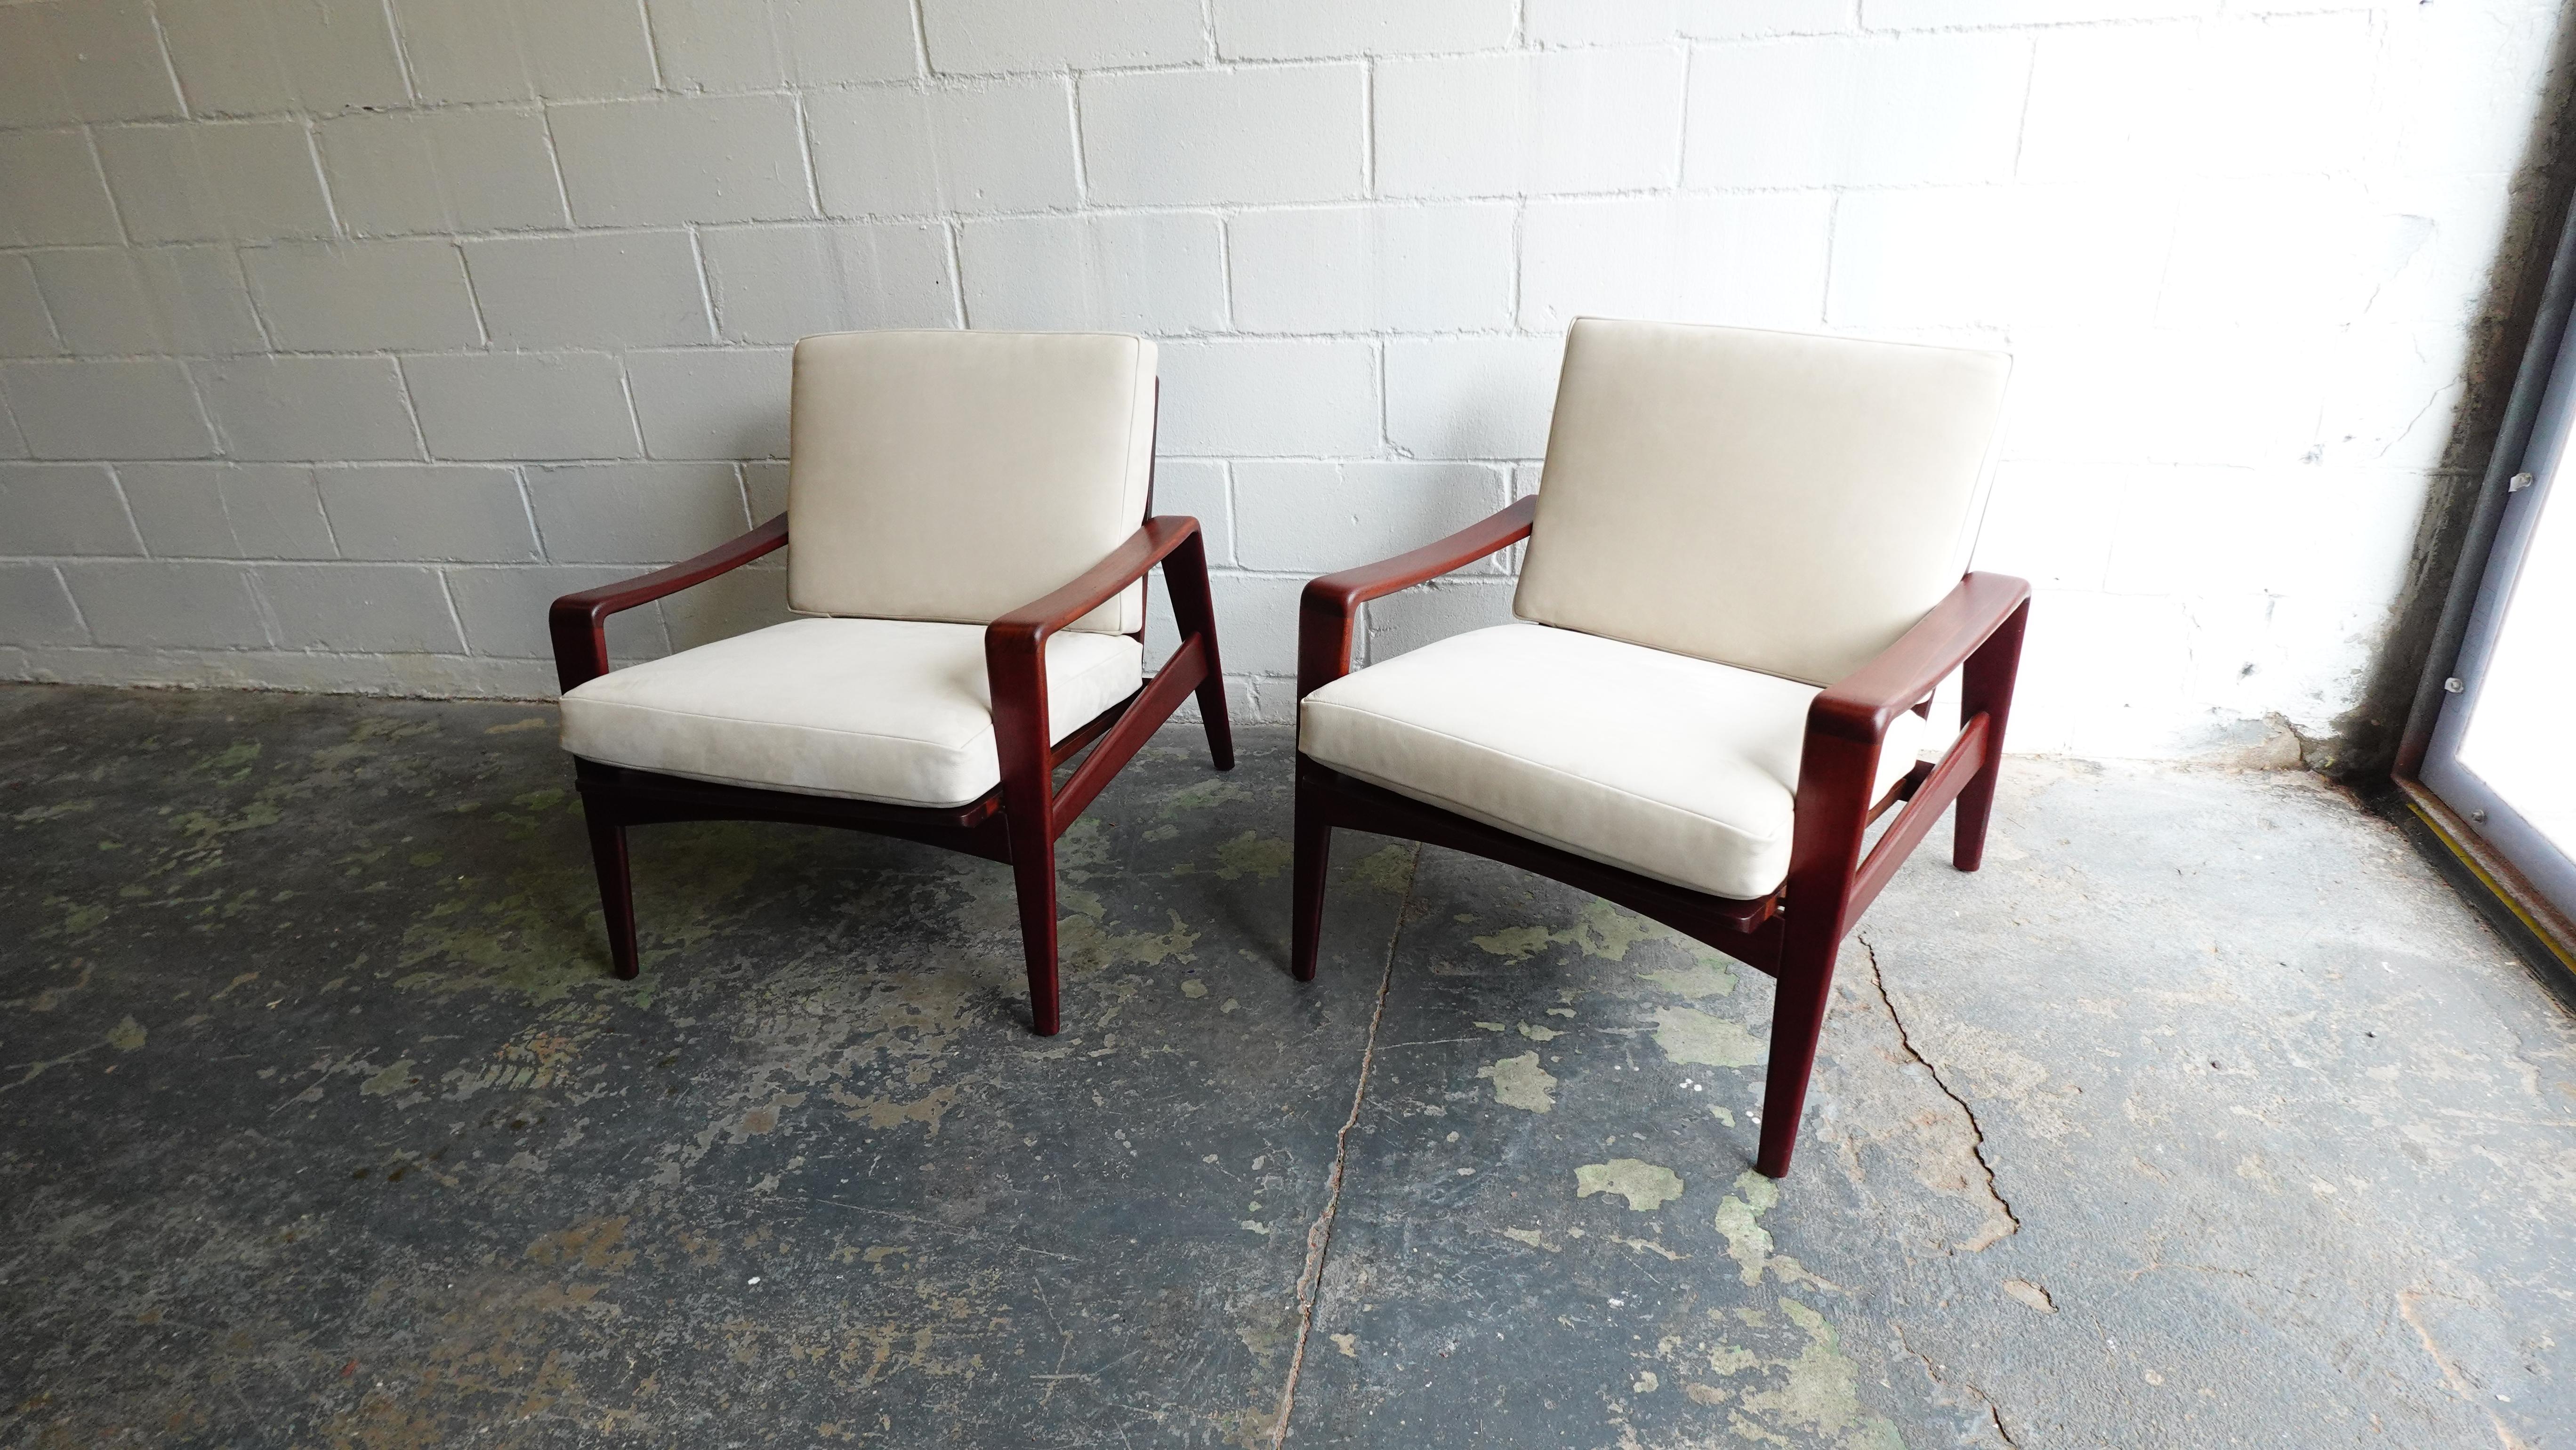 Pair of Arne Wahl Iverson Lounge Chairs for Komfort in Teak & Leather, 1960 In Good Condition For Sale In Brooklyn, NY